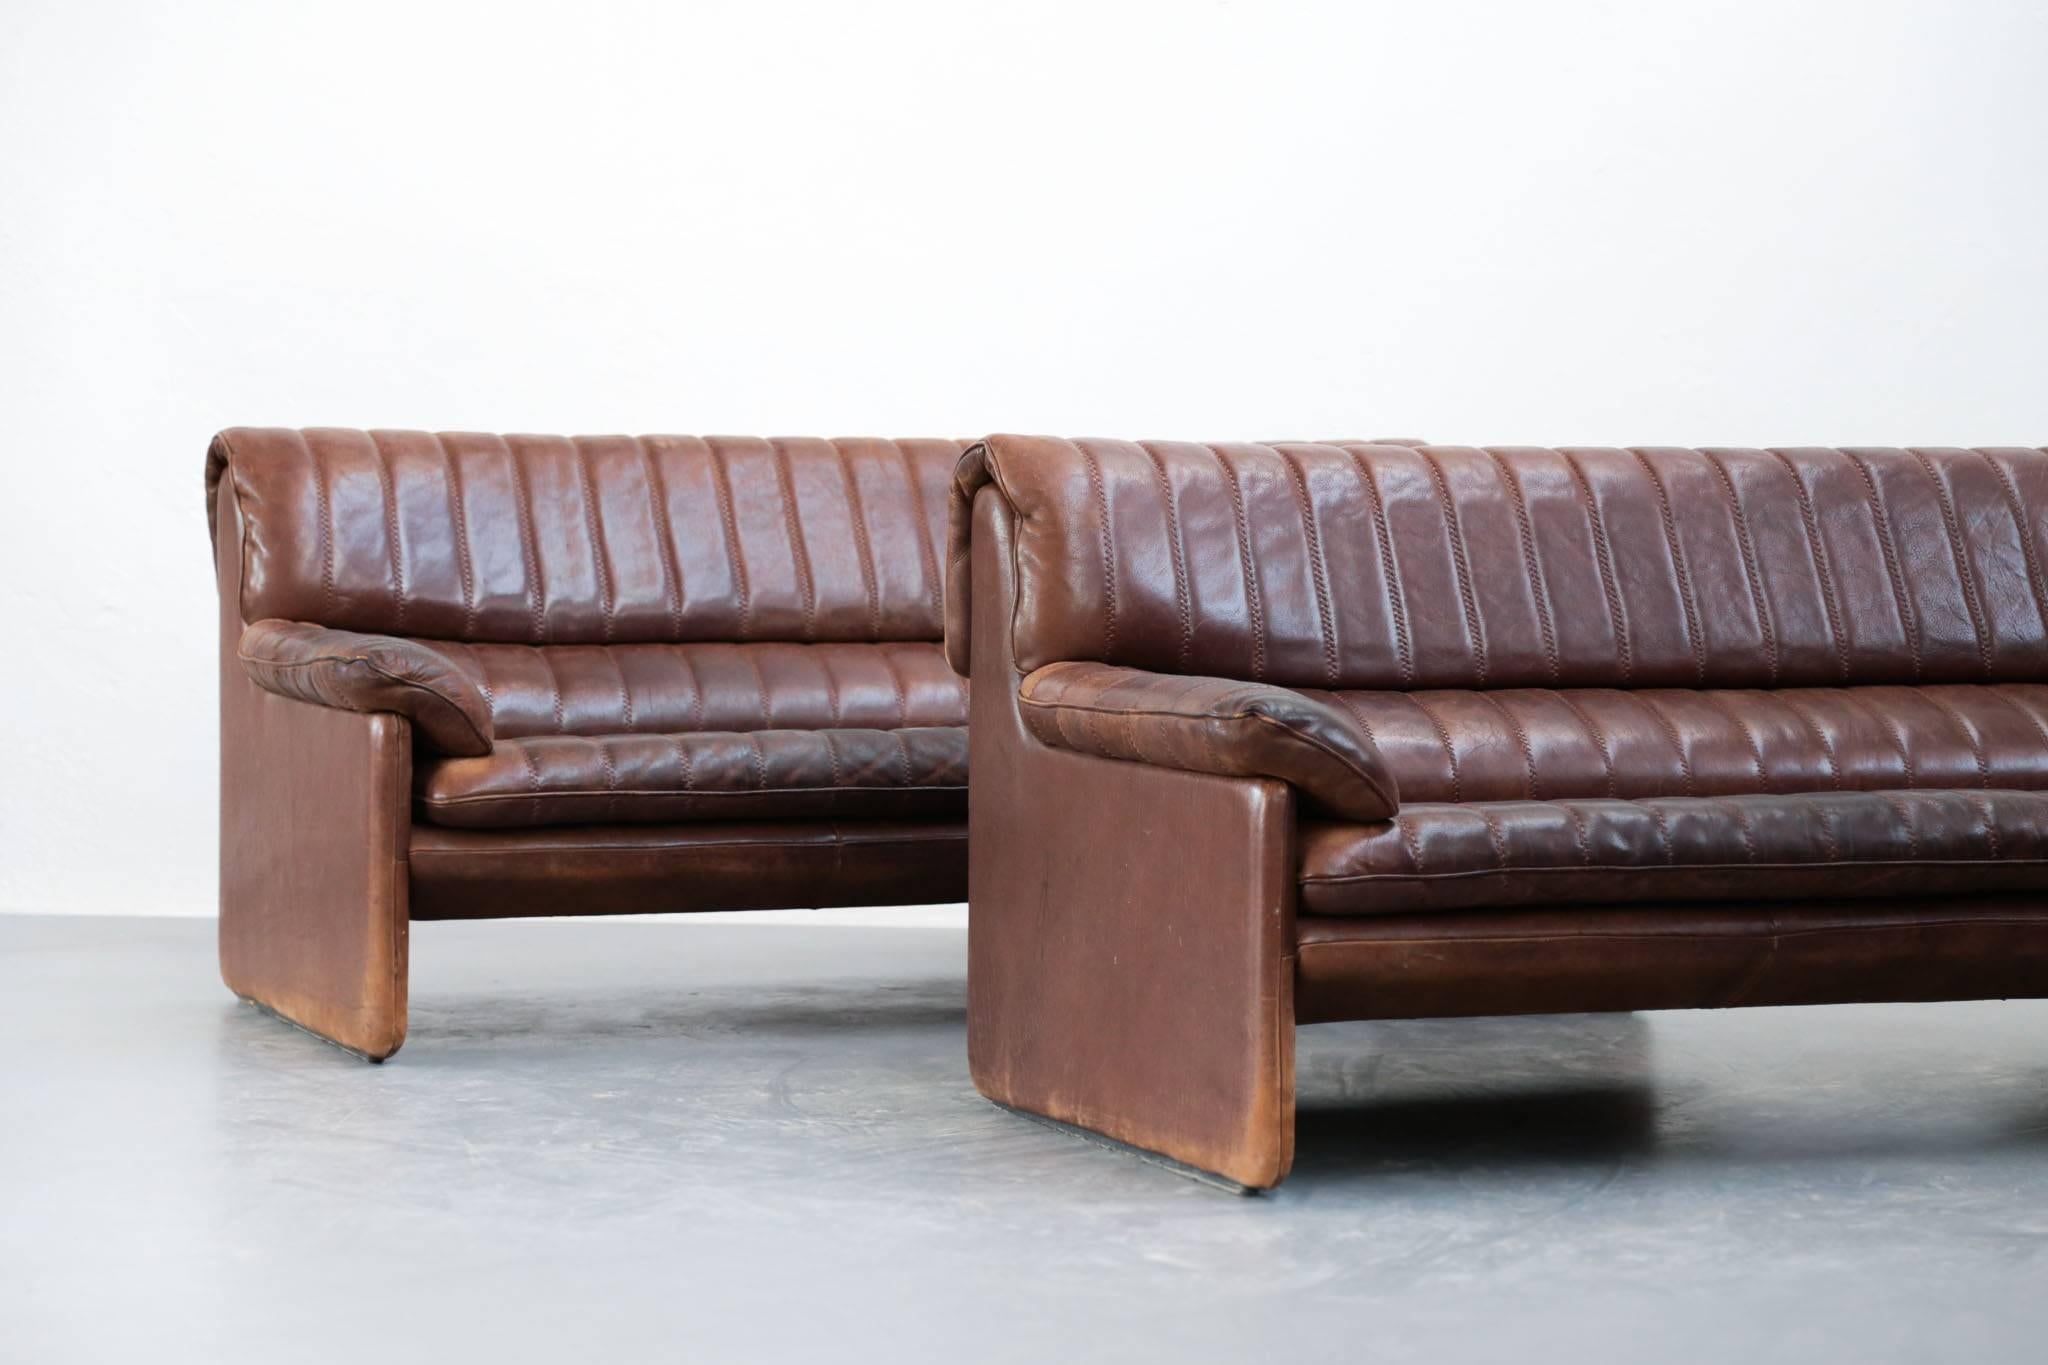 Pair of sofa from Sede model DS 85 in leather. Design 1970, more published today. Sofa of very high quality and beautiful patina on the leather.